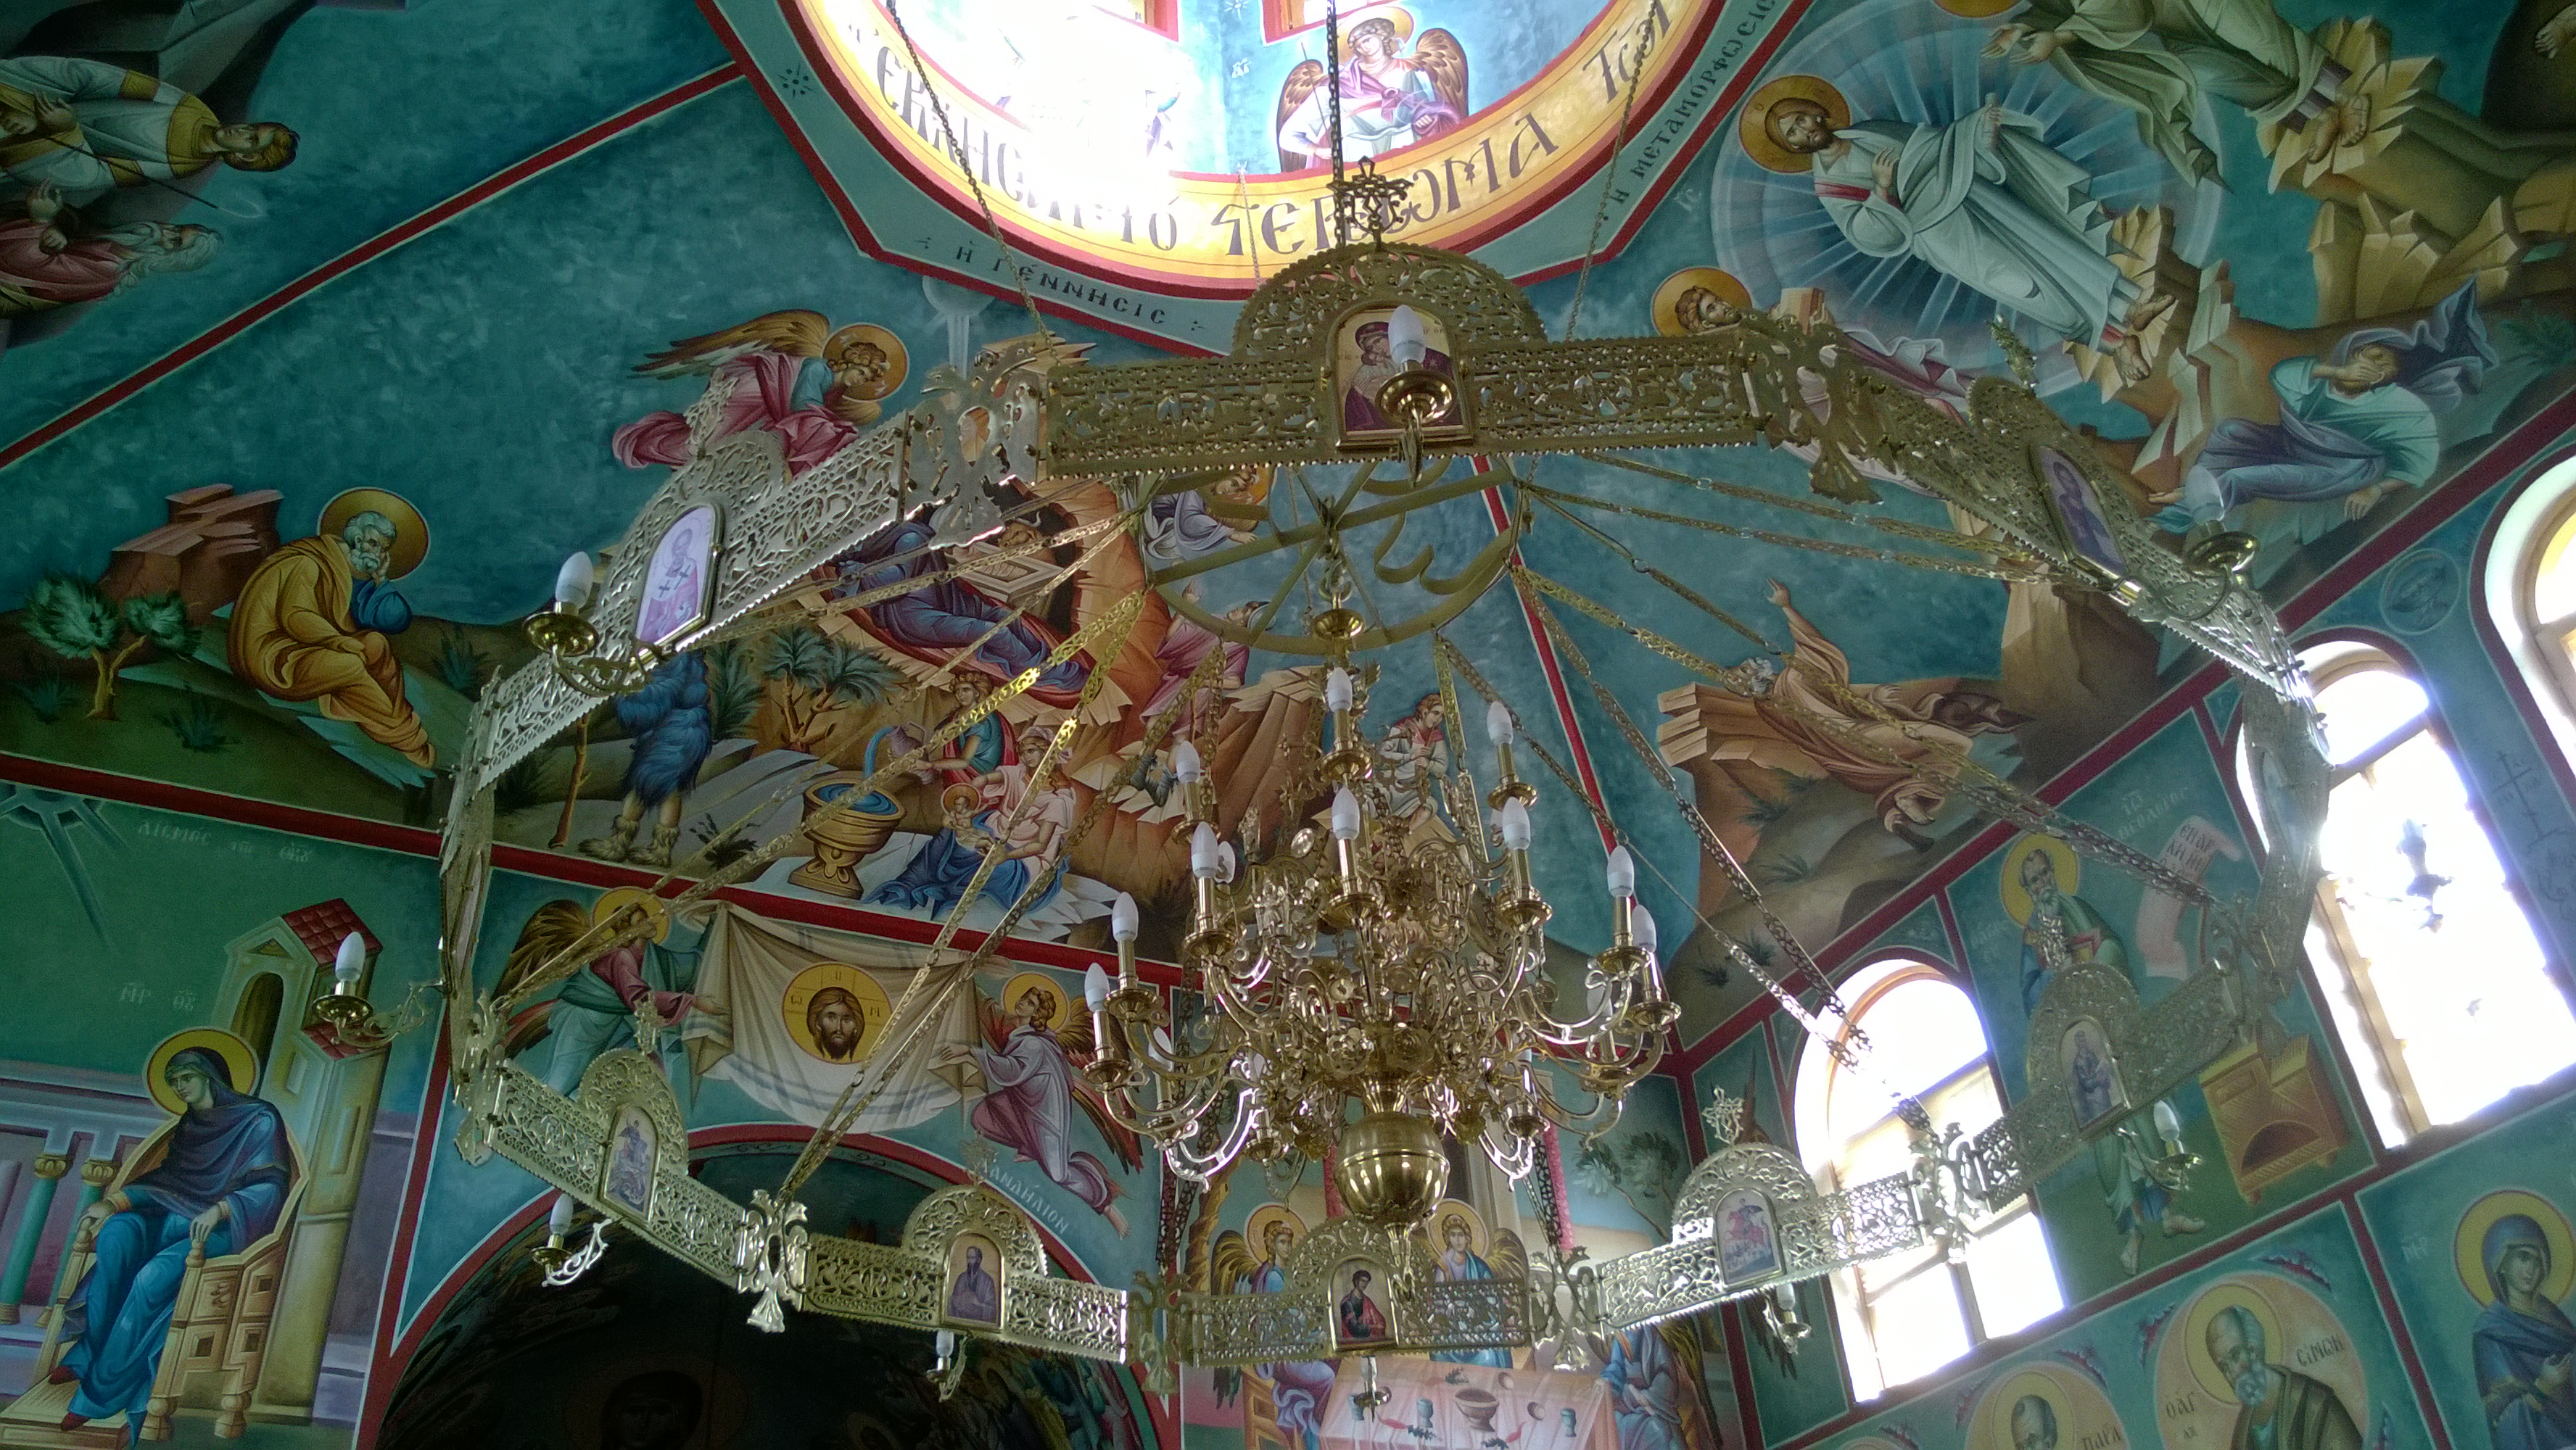 A view of the chandelier and dome of the Church of St. John the Theologian in Joensuu, Finland.